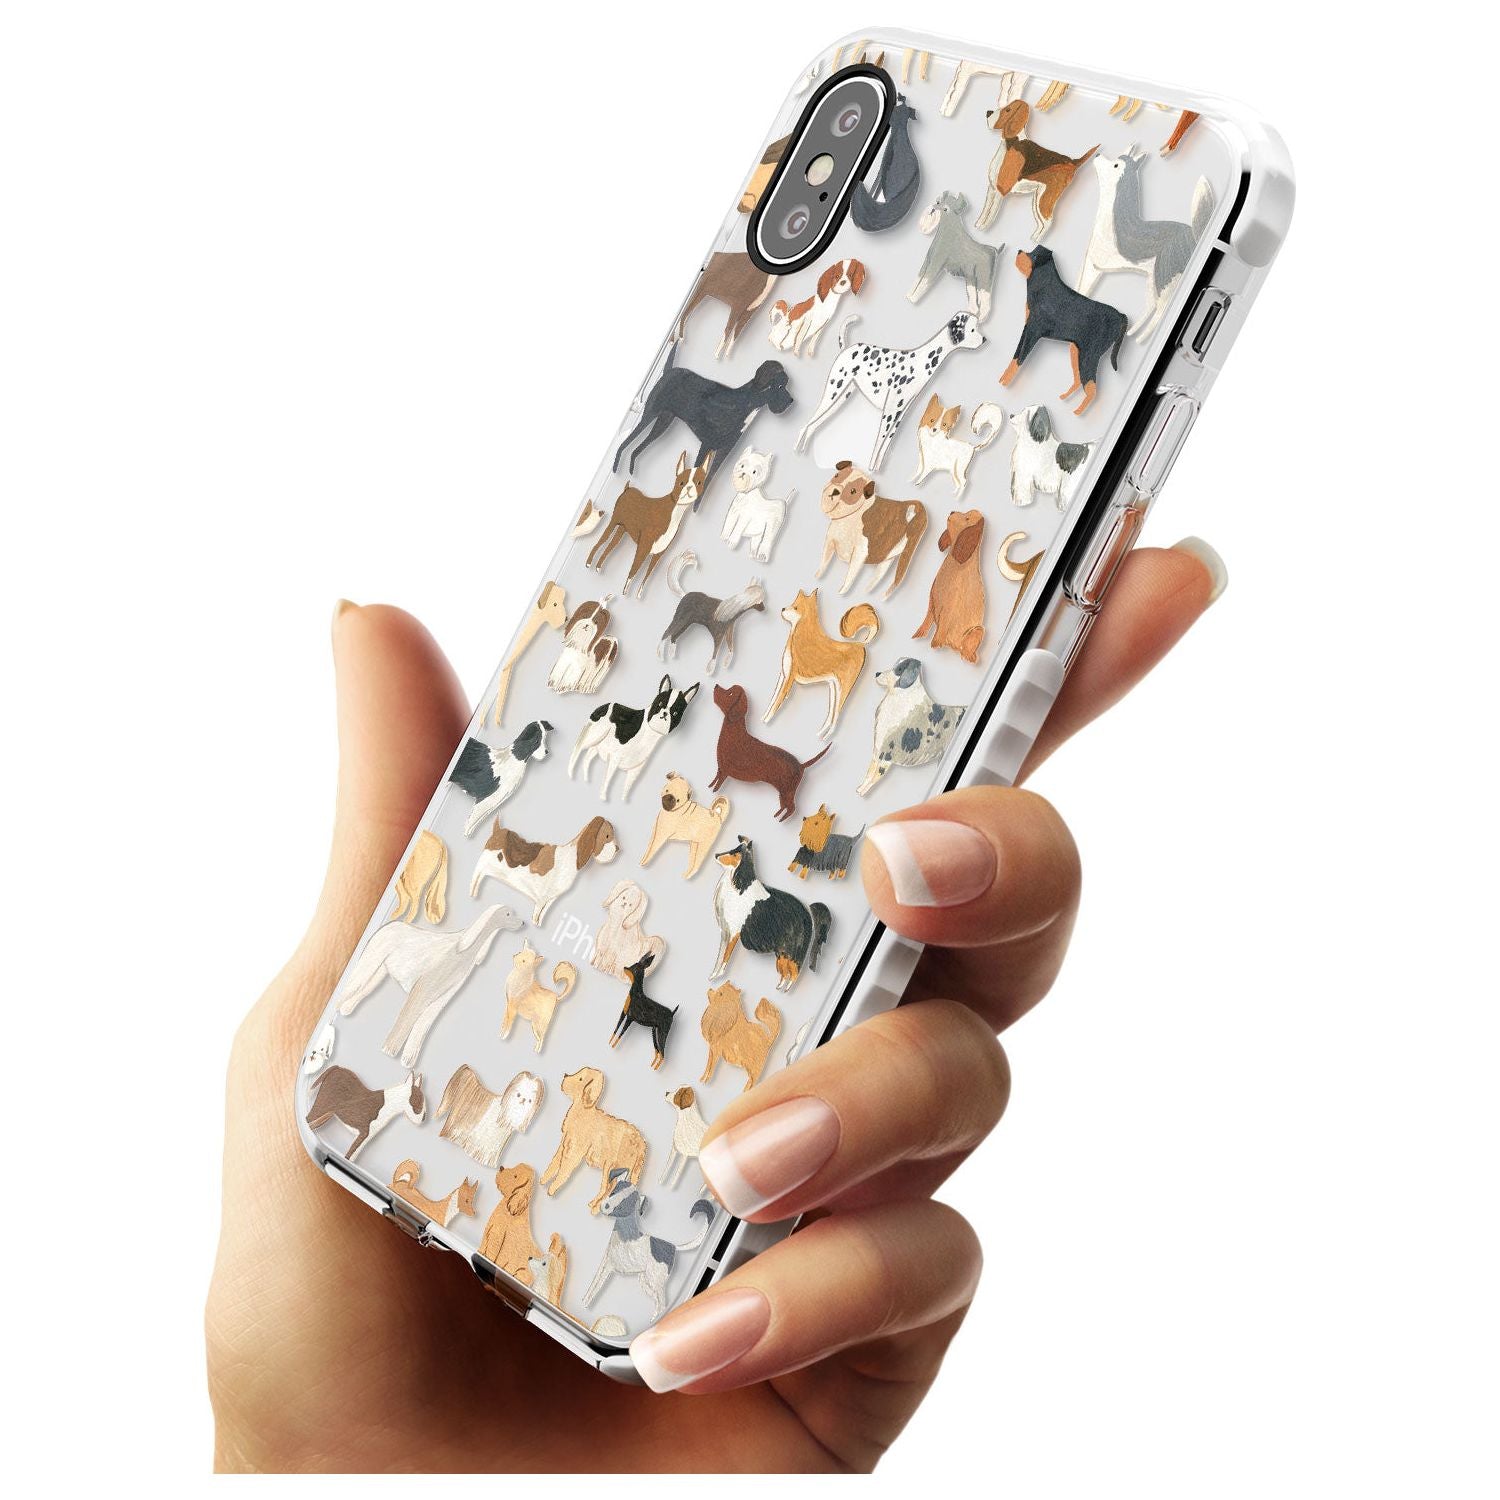 Hand Painted Dogs Impact Phone Case for iPhone X XS Max XR